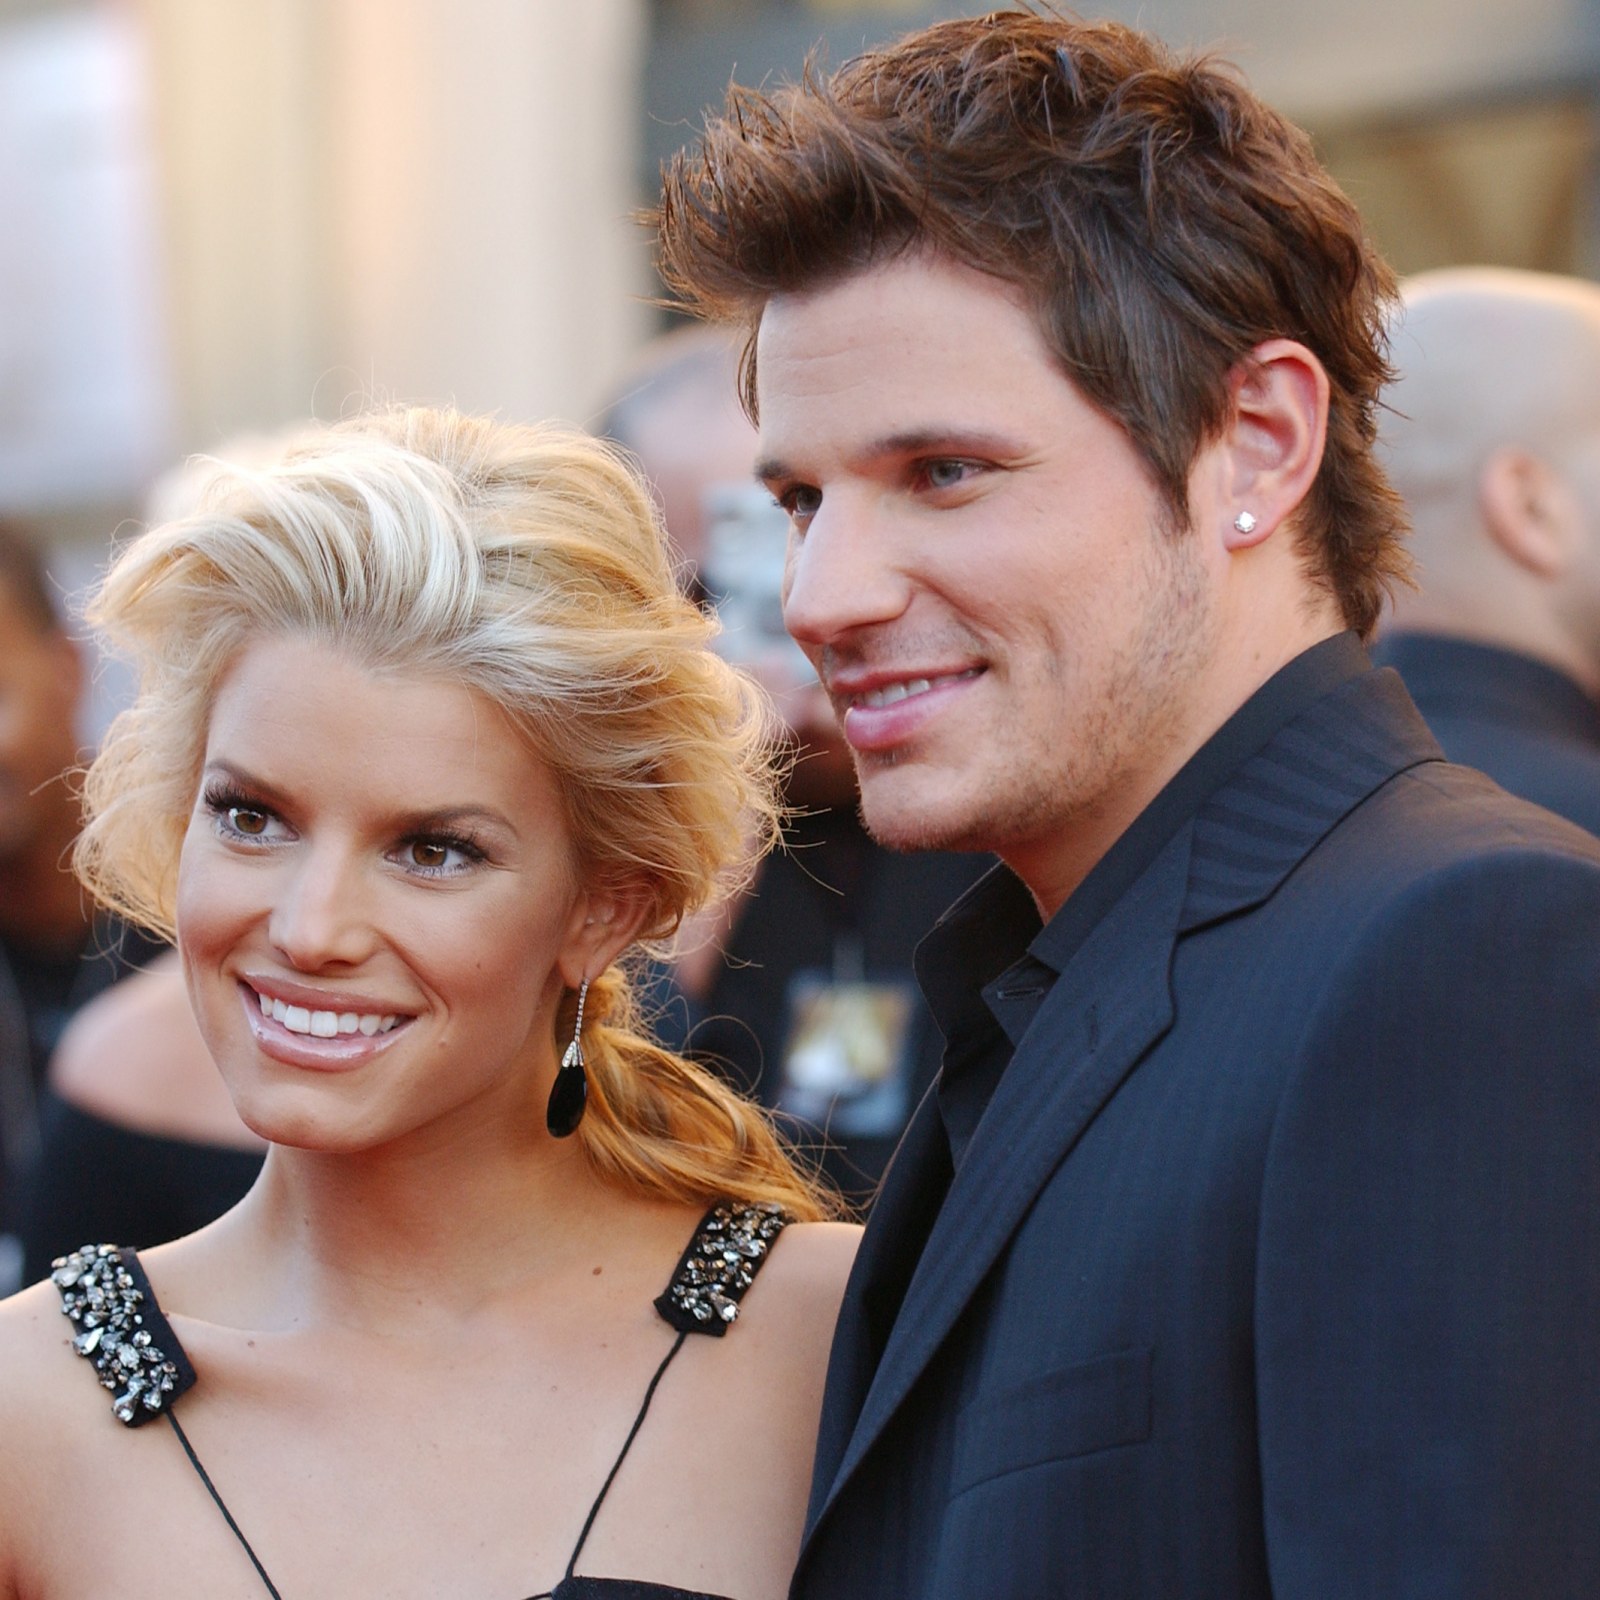 What Jessica Simpson's Ex-husband Nick Lachey Has Said About Her Memoir